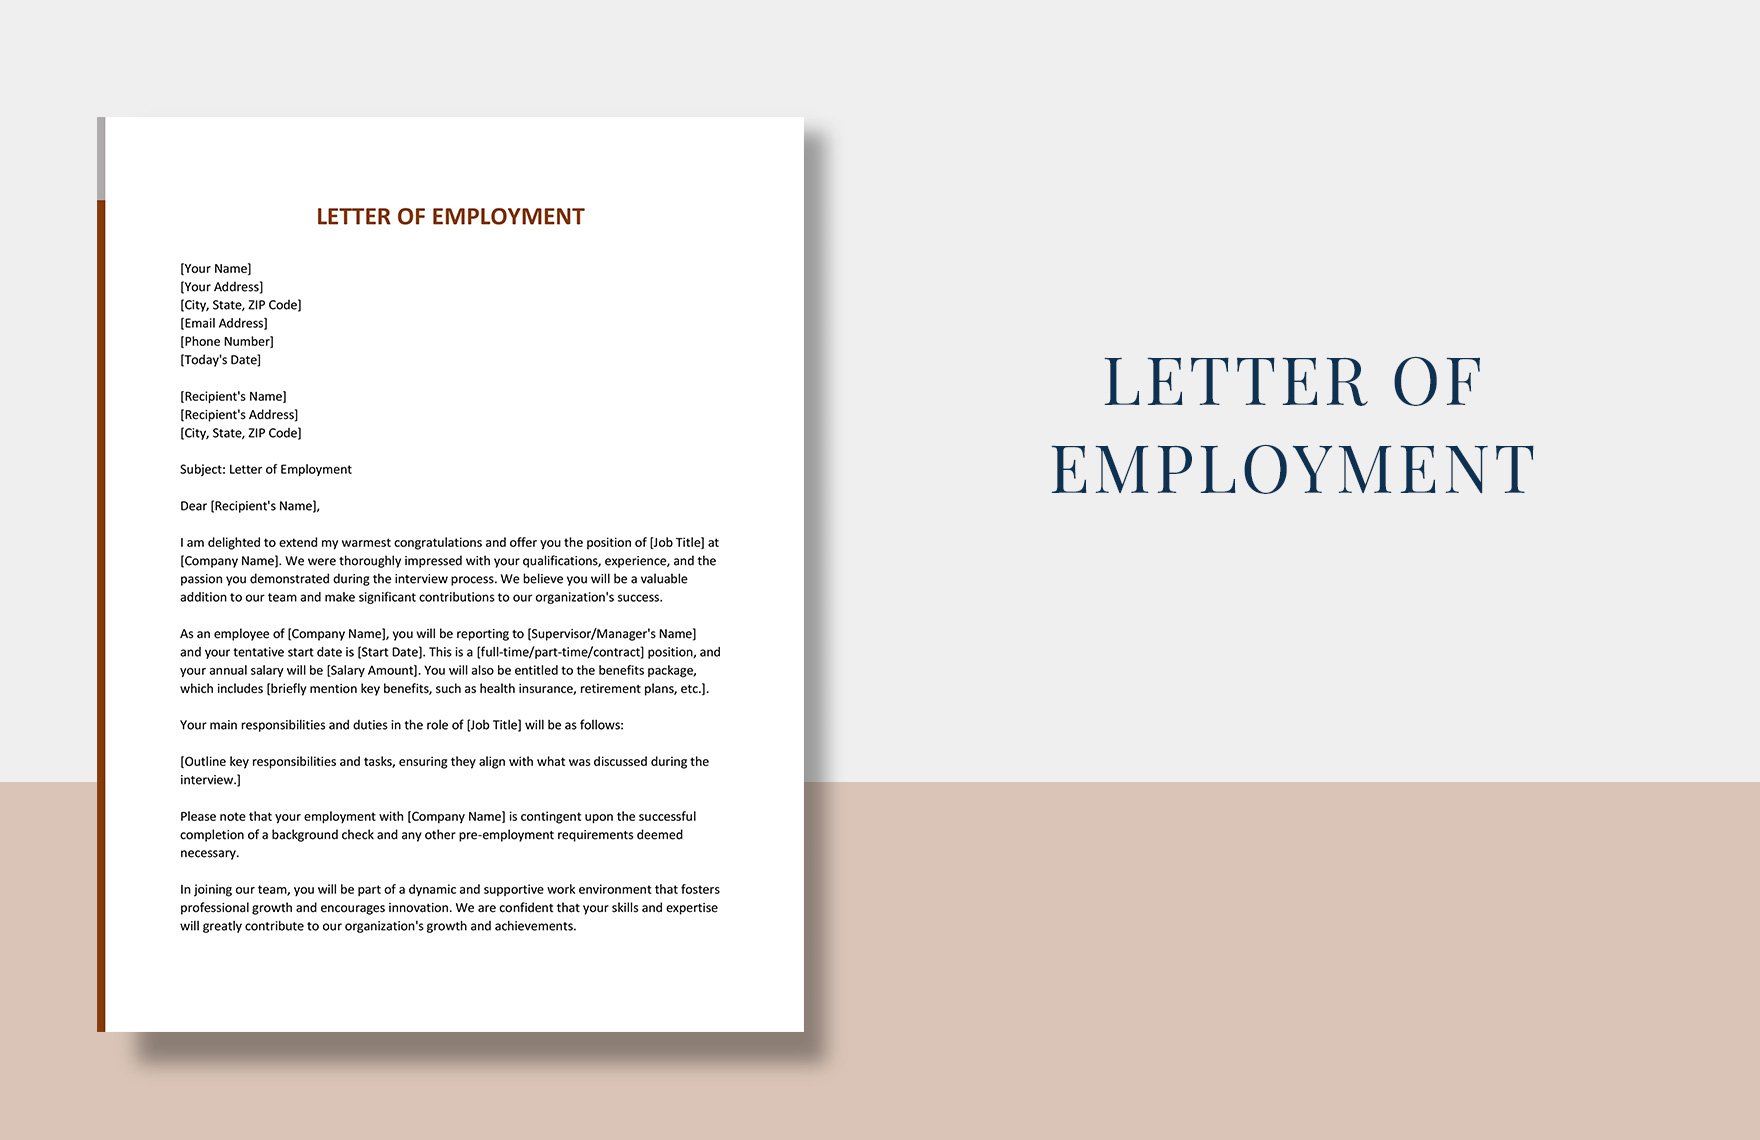 Free Letter of Employment